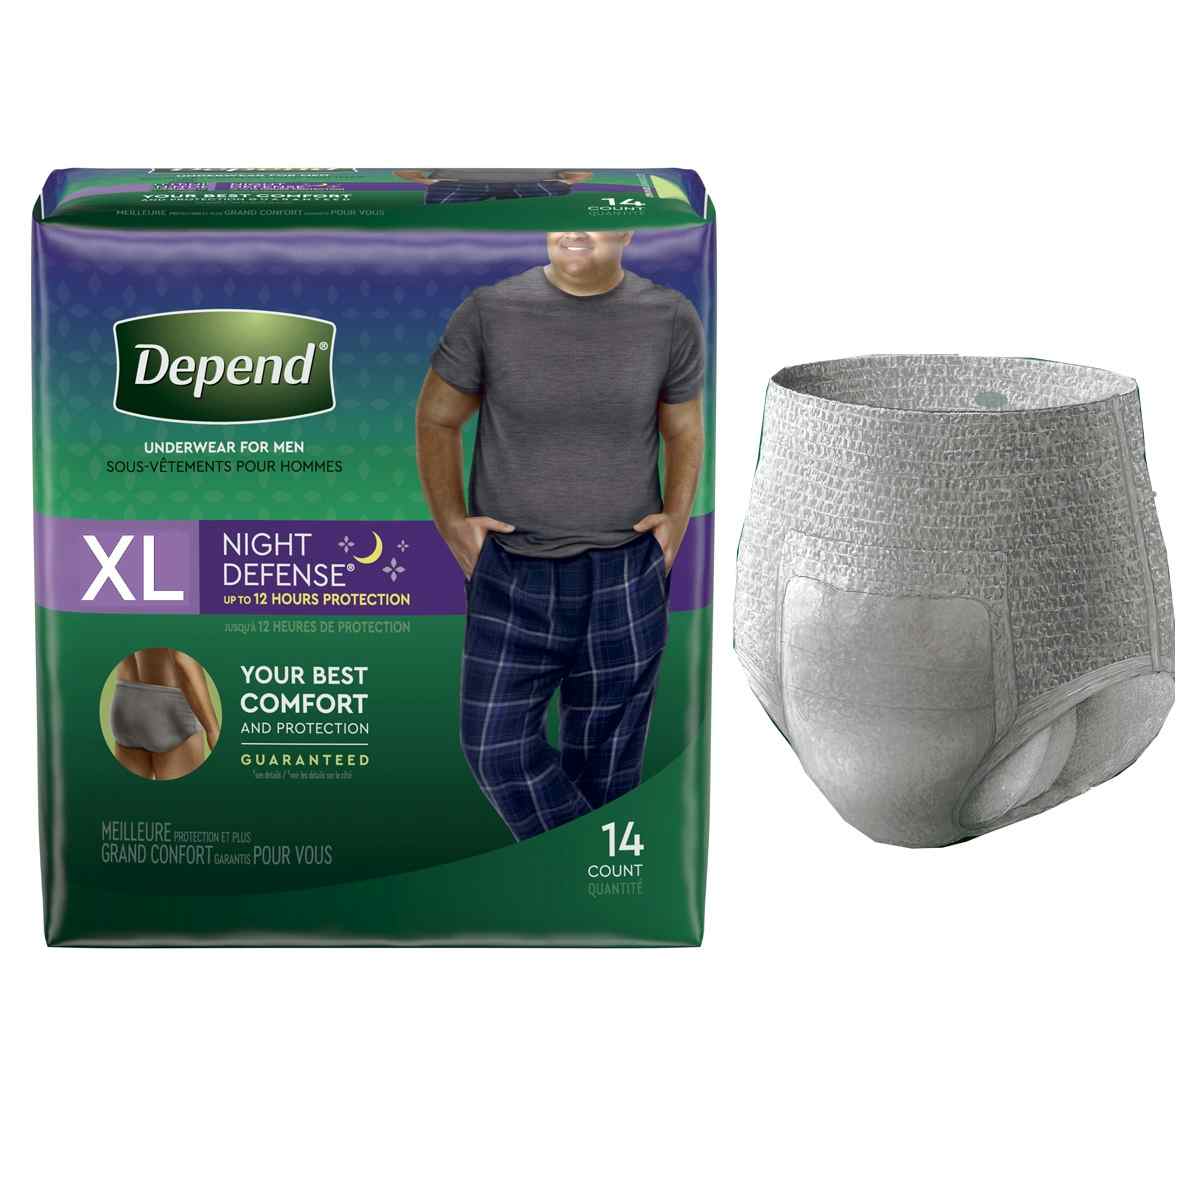 Depend Night Defense Pull-Up Underwear for Men, Overnight Absorbancy, 51126, X-Large (45-64'') - Pack of 12